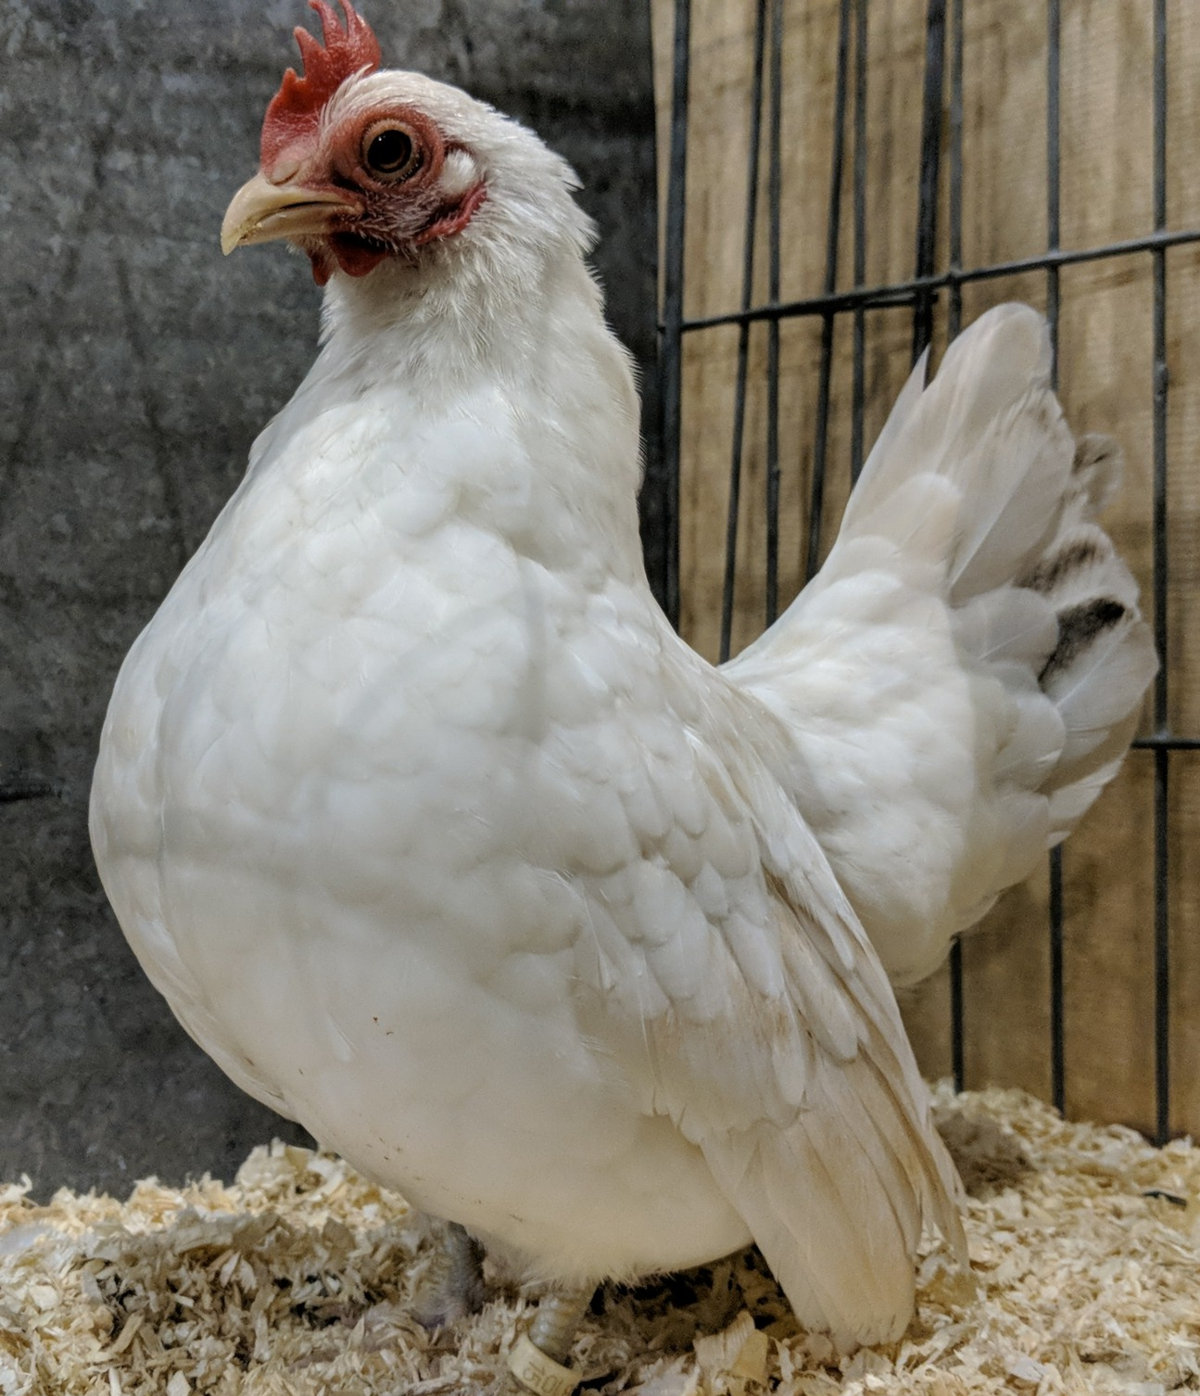 The creeper gene in Japanese bantams is one of the more well known lethal genes.